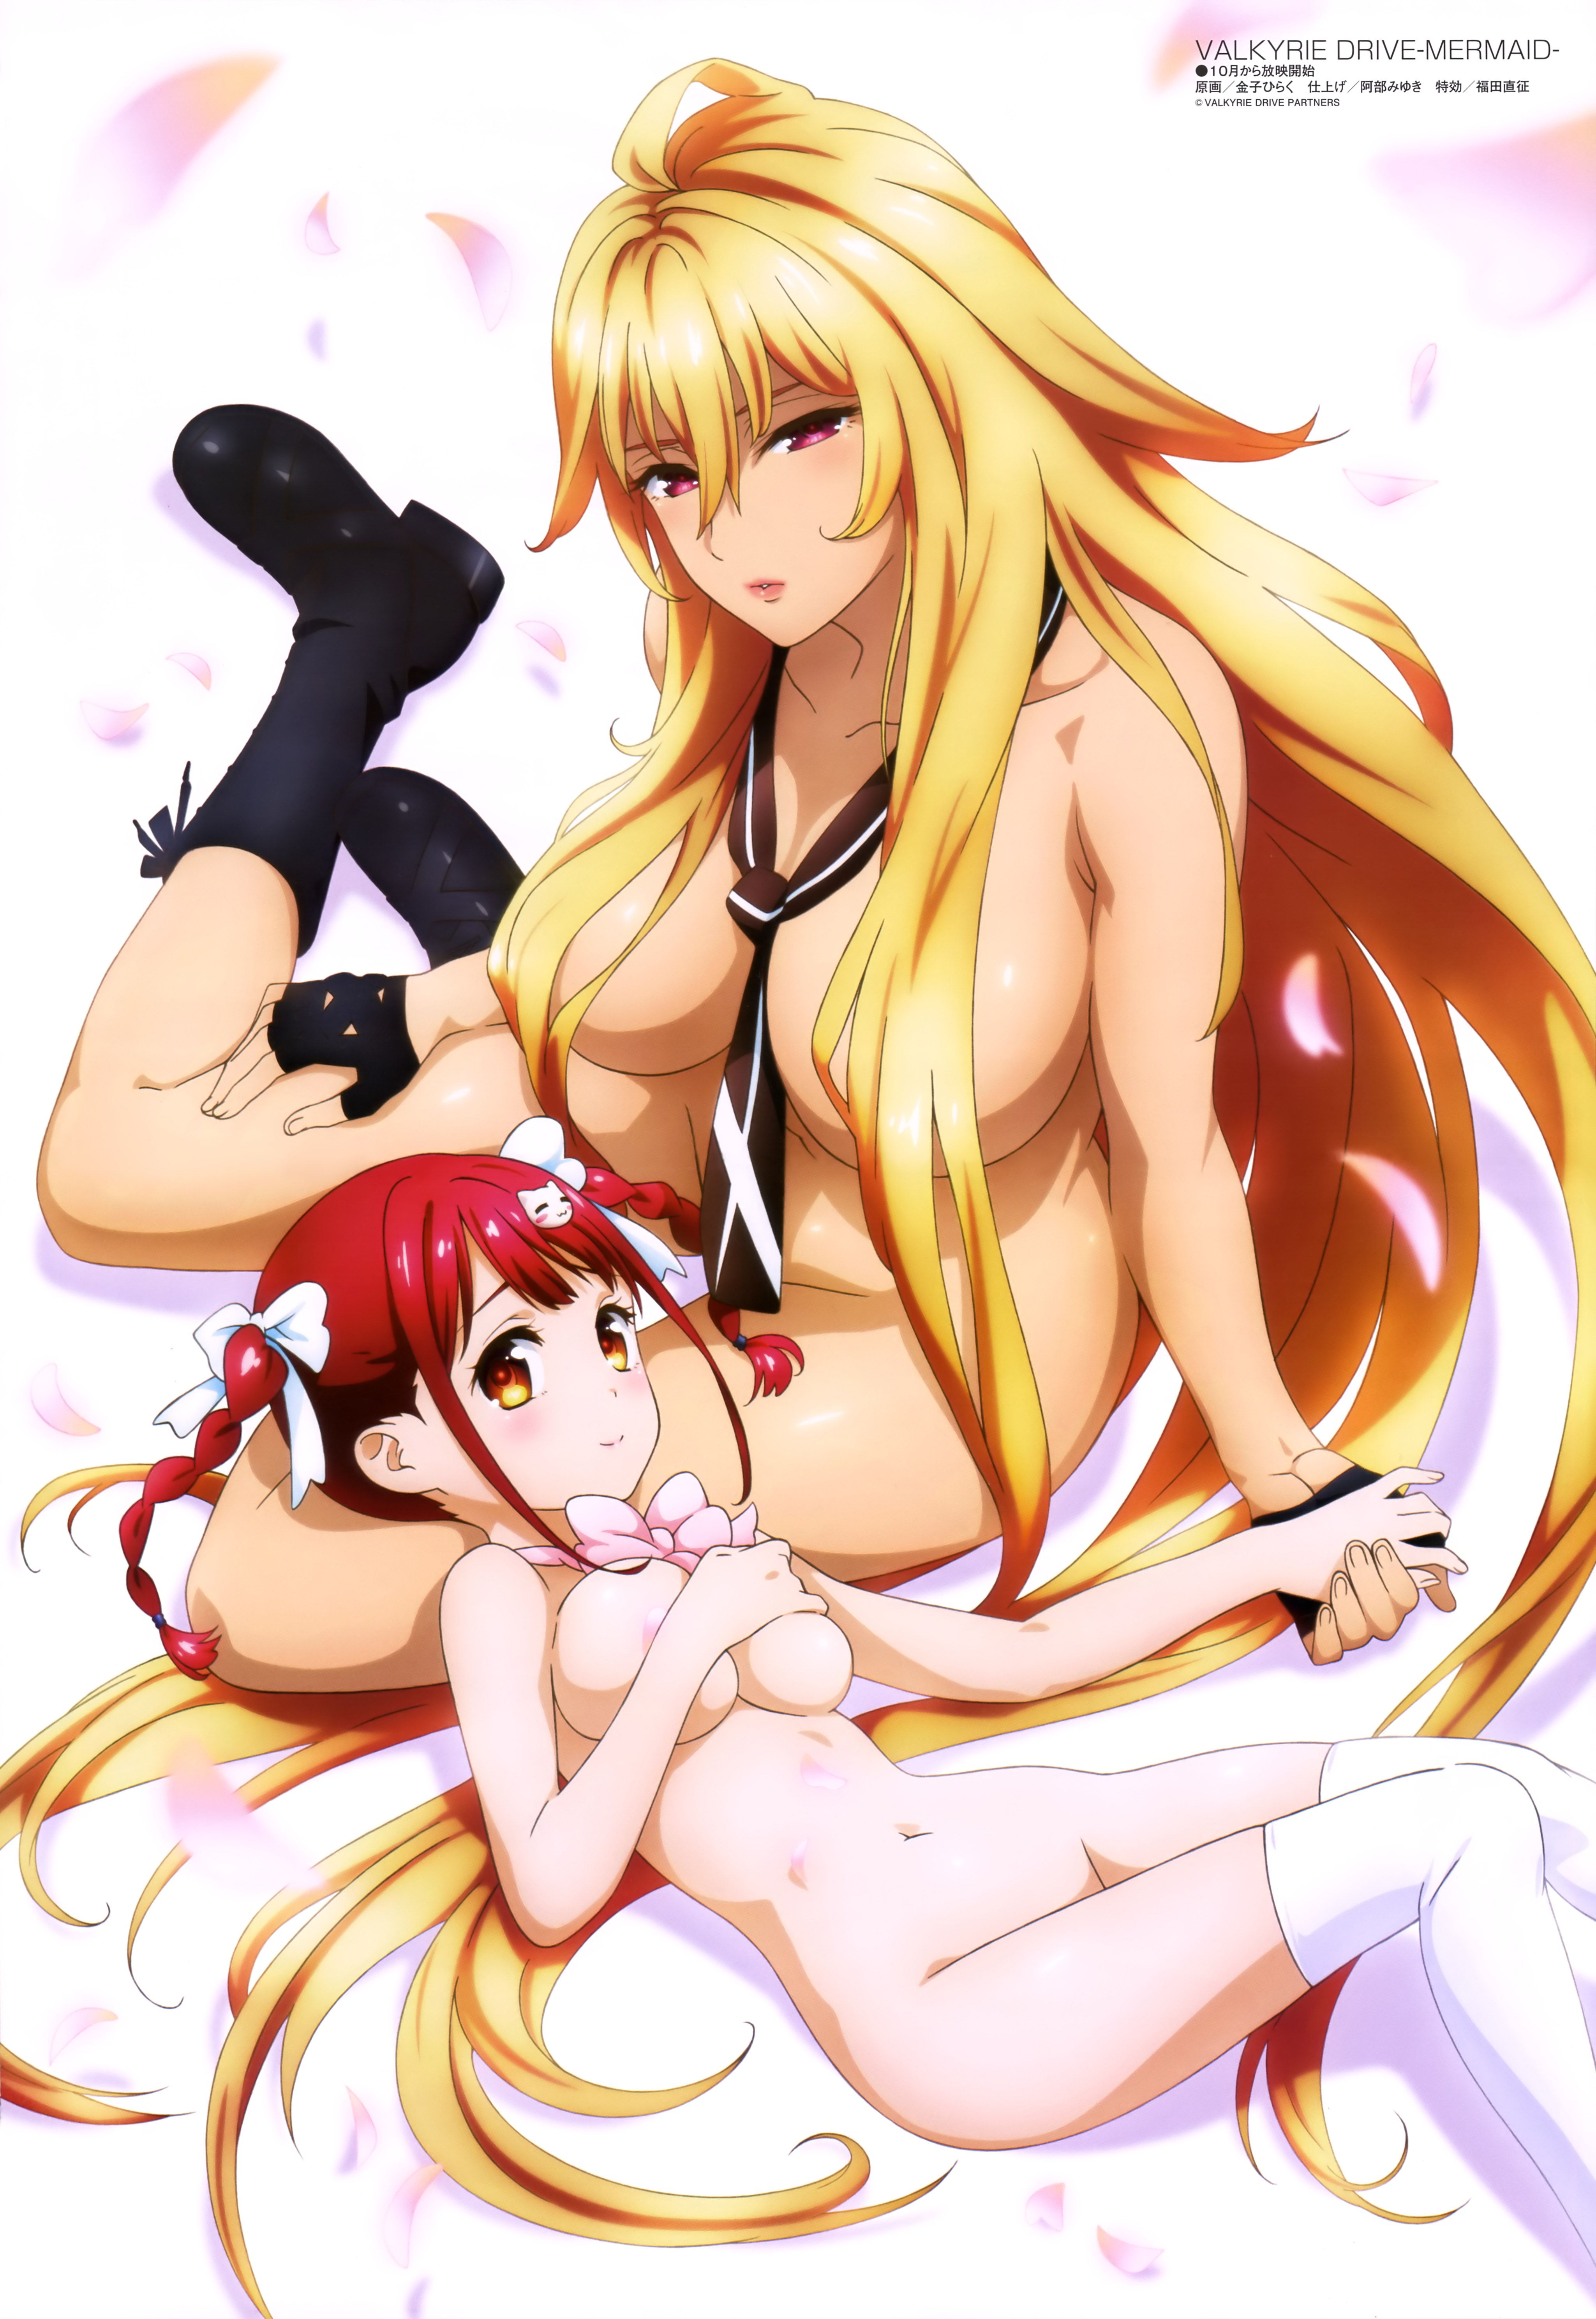 Valkyrie drive Mermaid you boobs tits erotic pictures Rees, 8